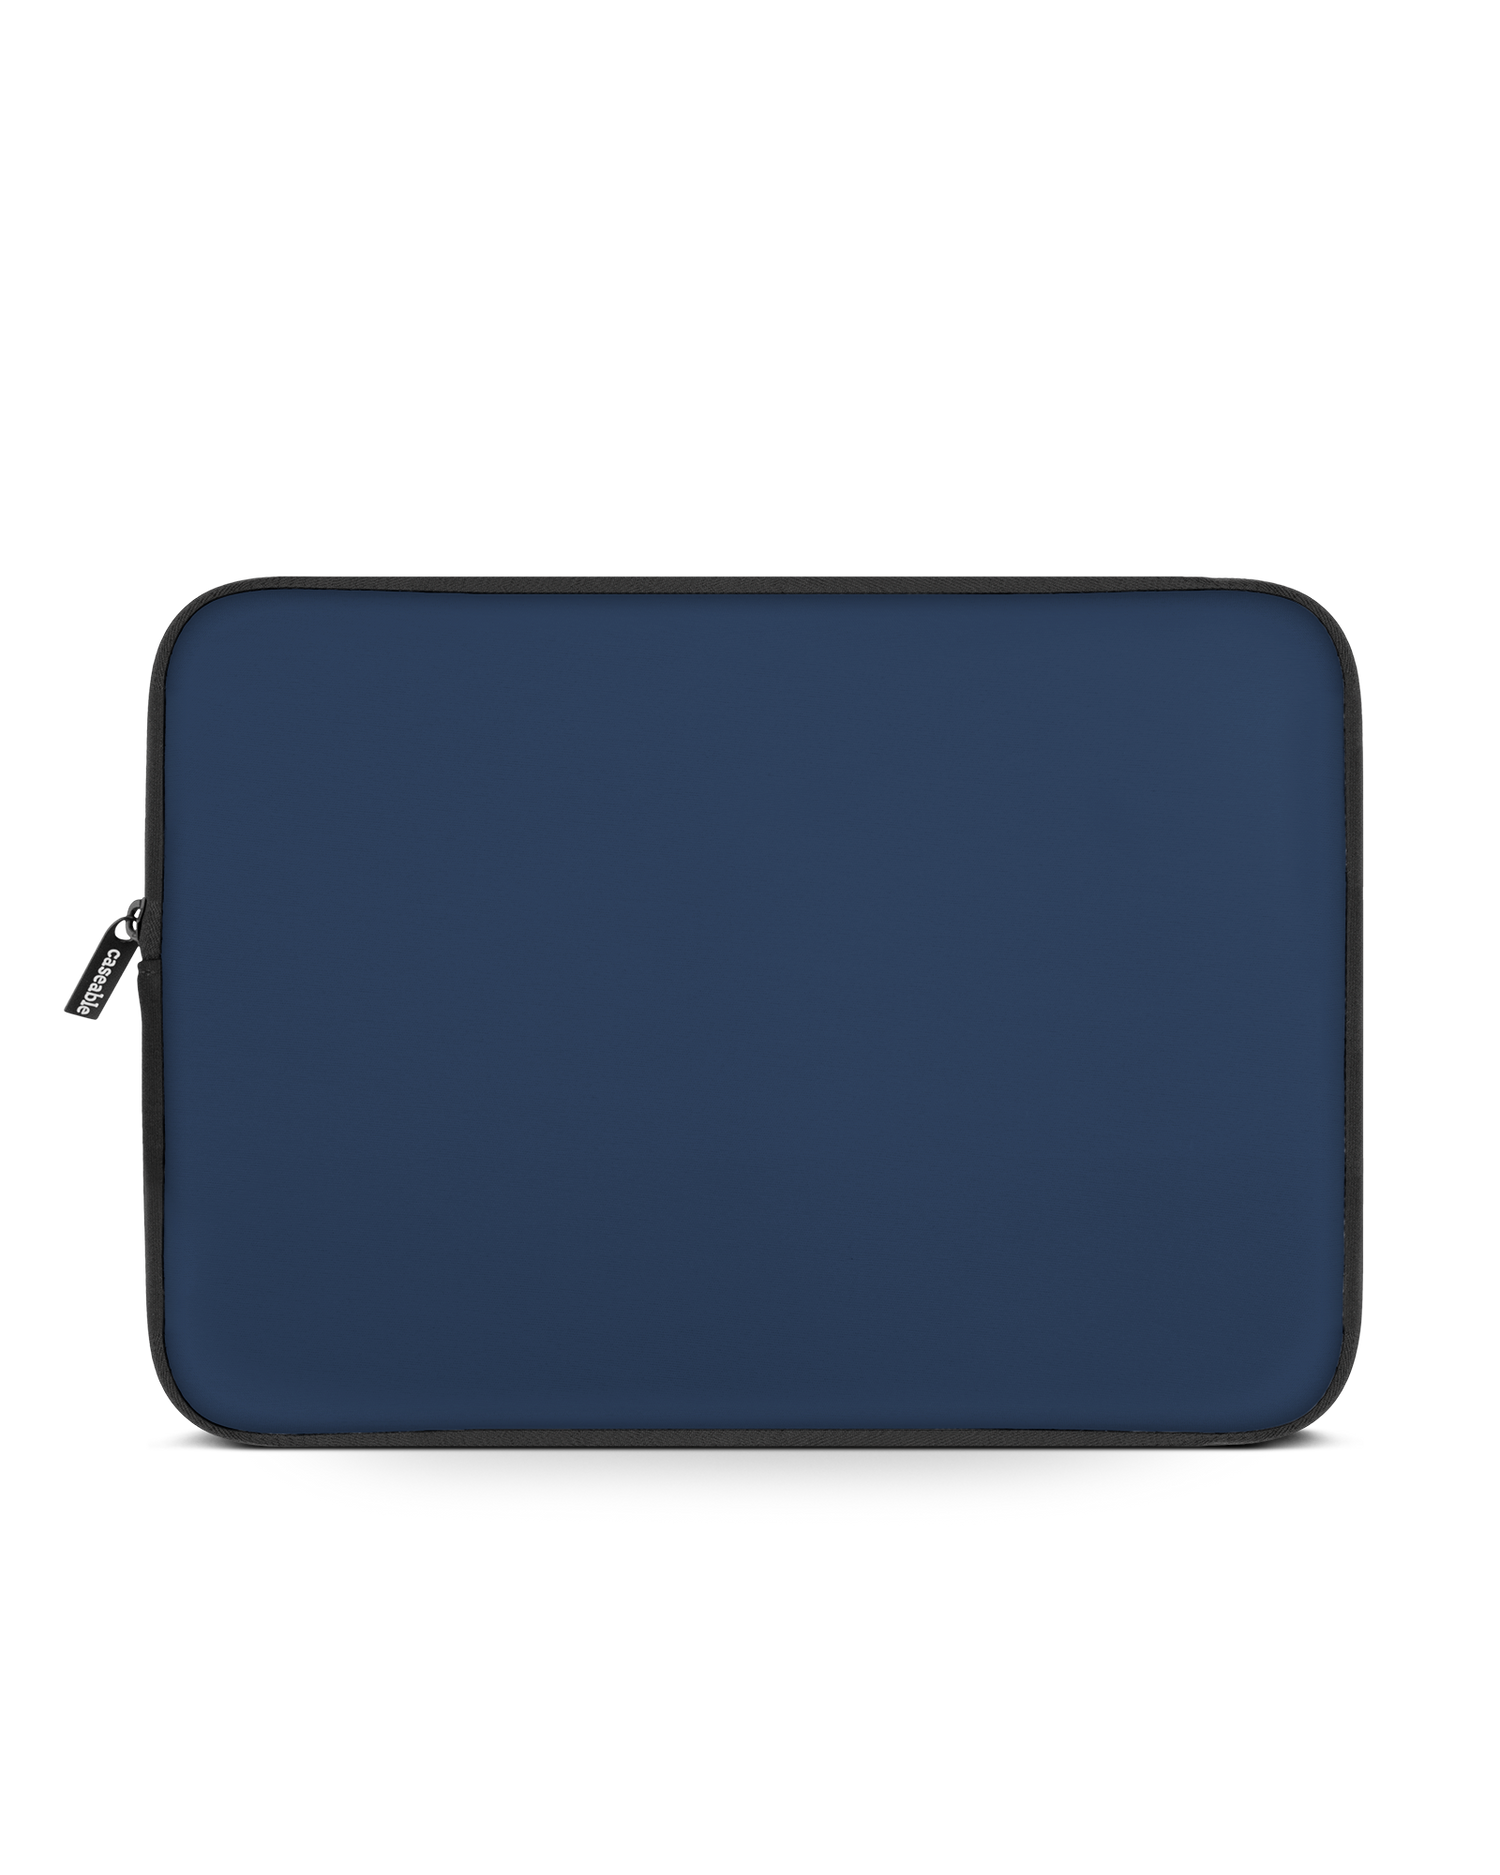 NAVY Laptop Case 16 inch: Front View